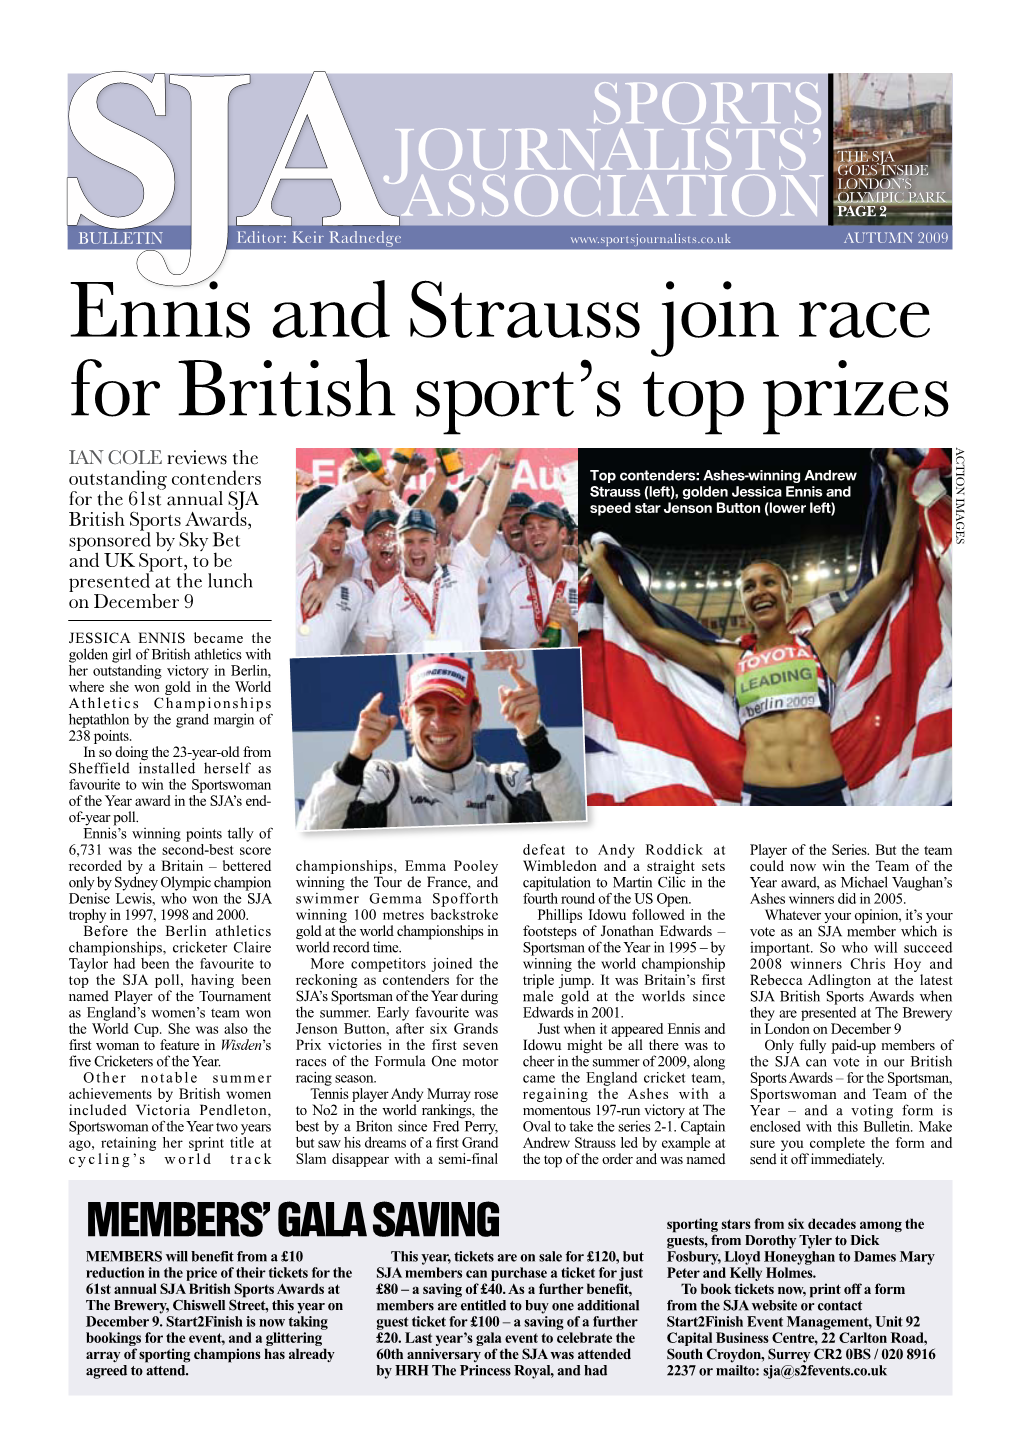 Ennis and Strauss Join Race for British Sport's Top Prizes